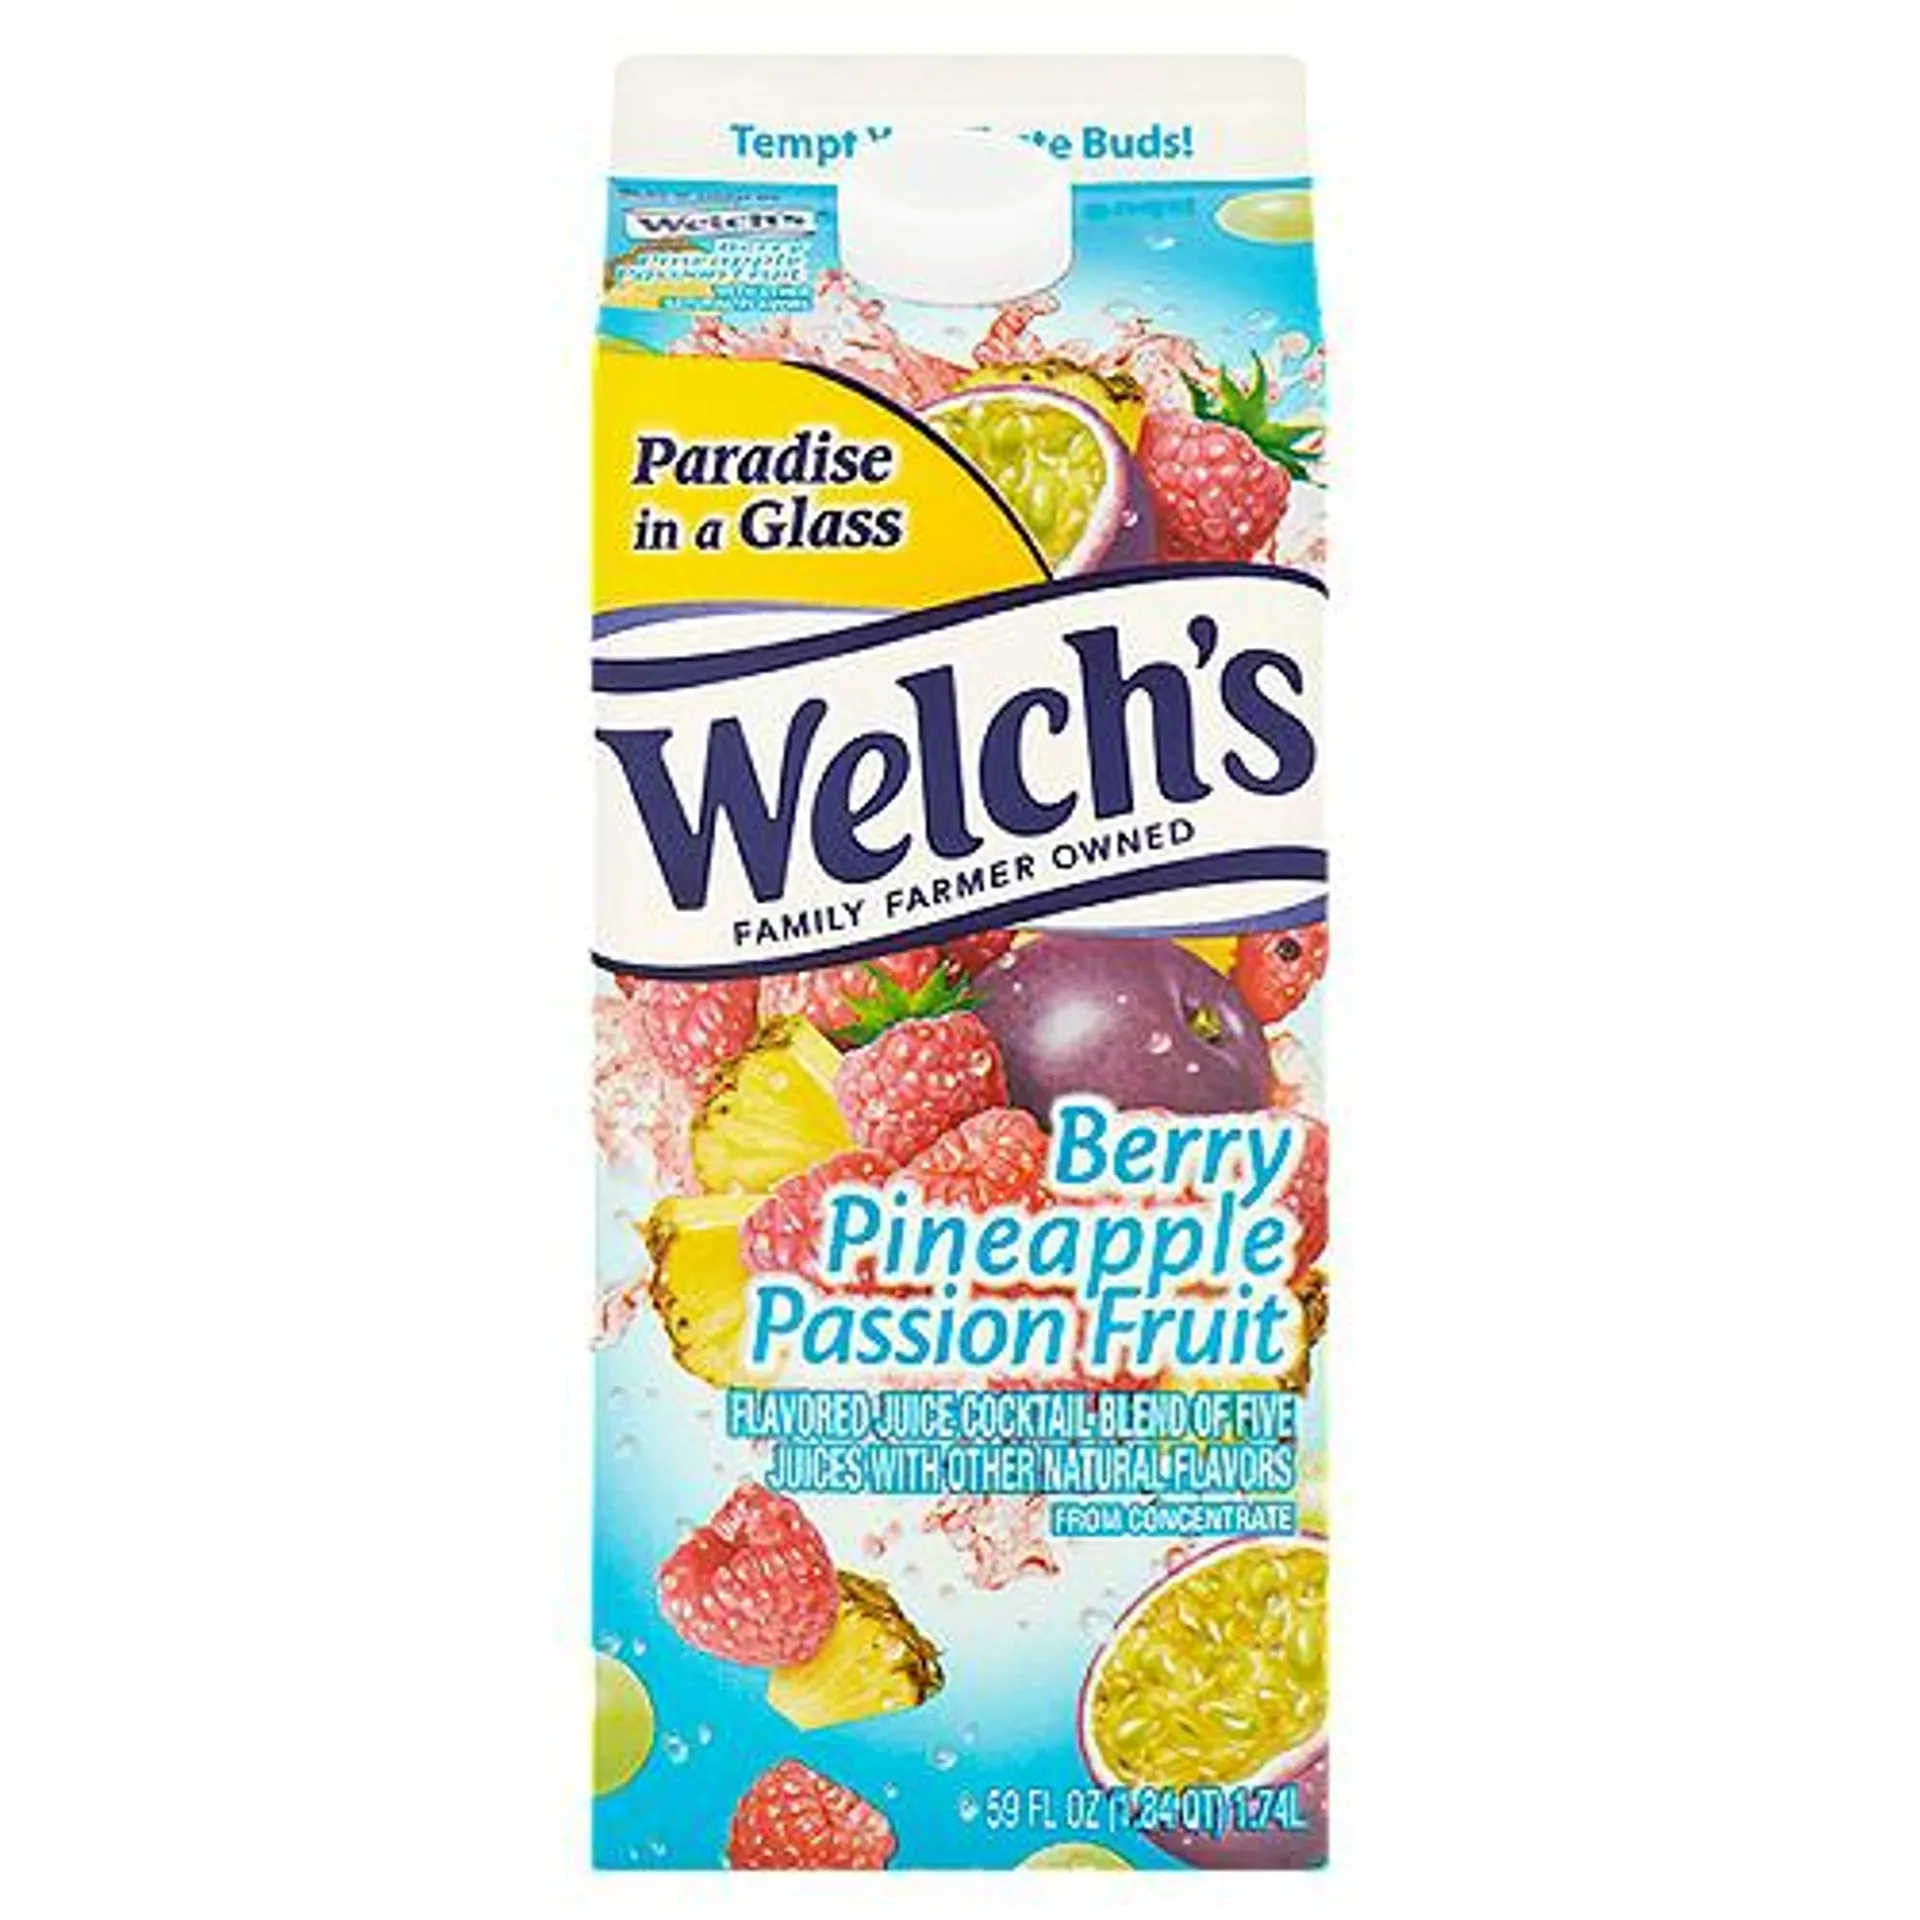 Welch's Berry Pineapple Passion Fruit Juice Cocktail, 59 fl oz